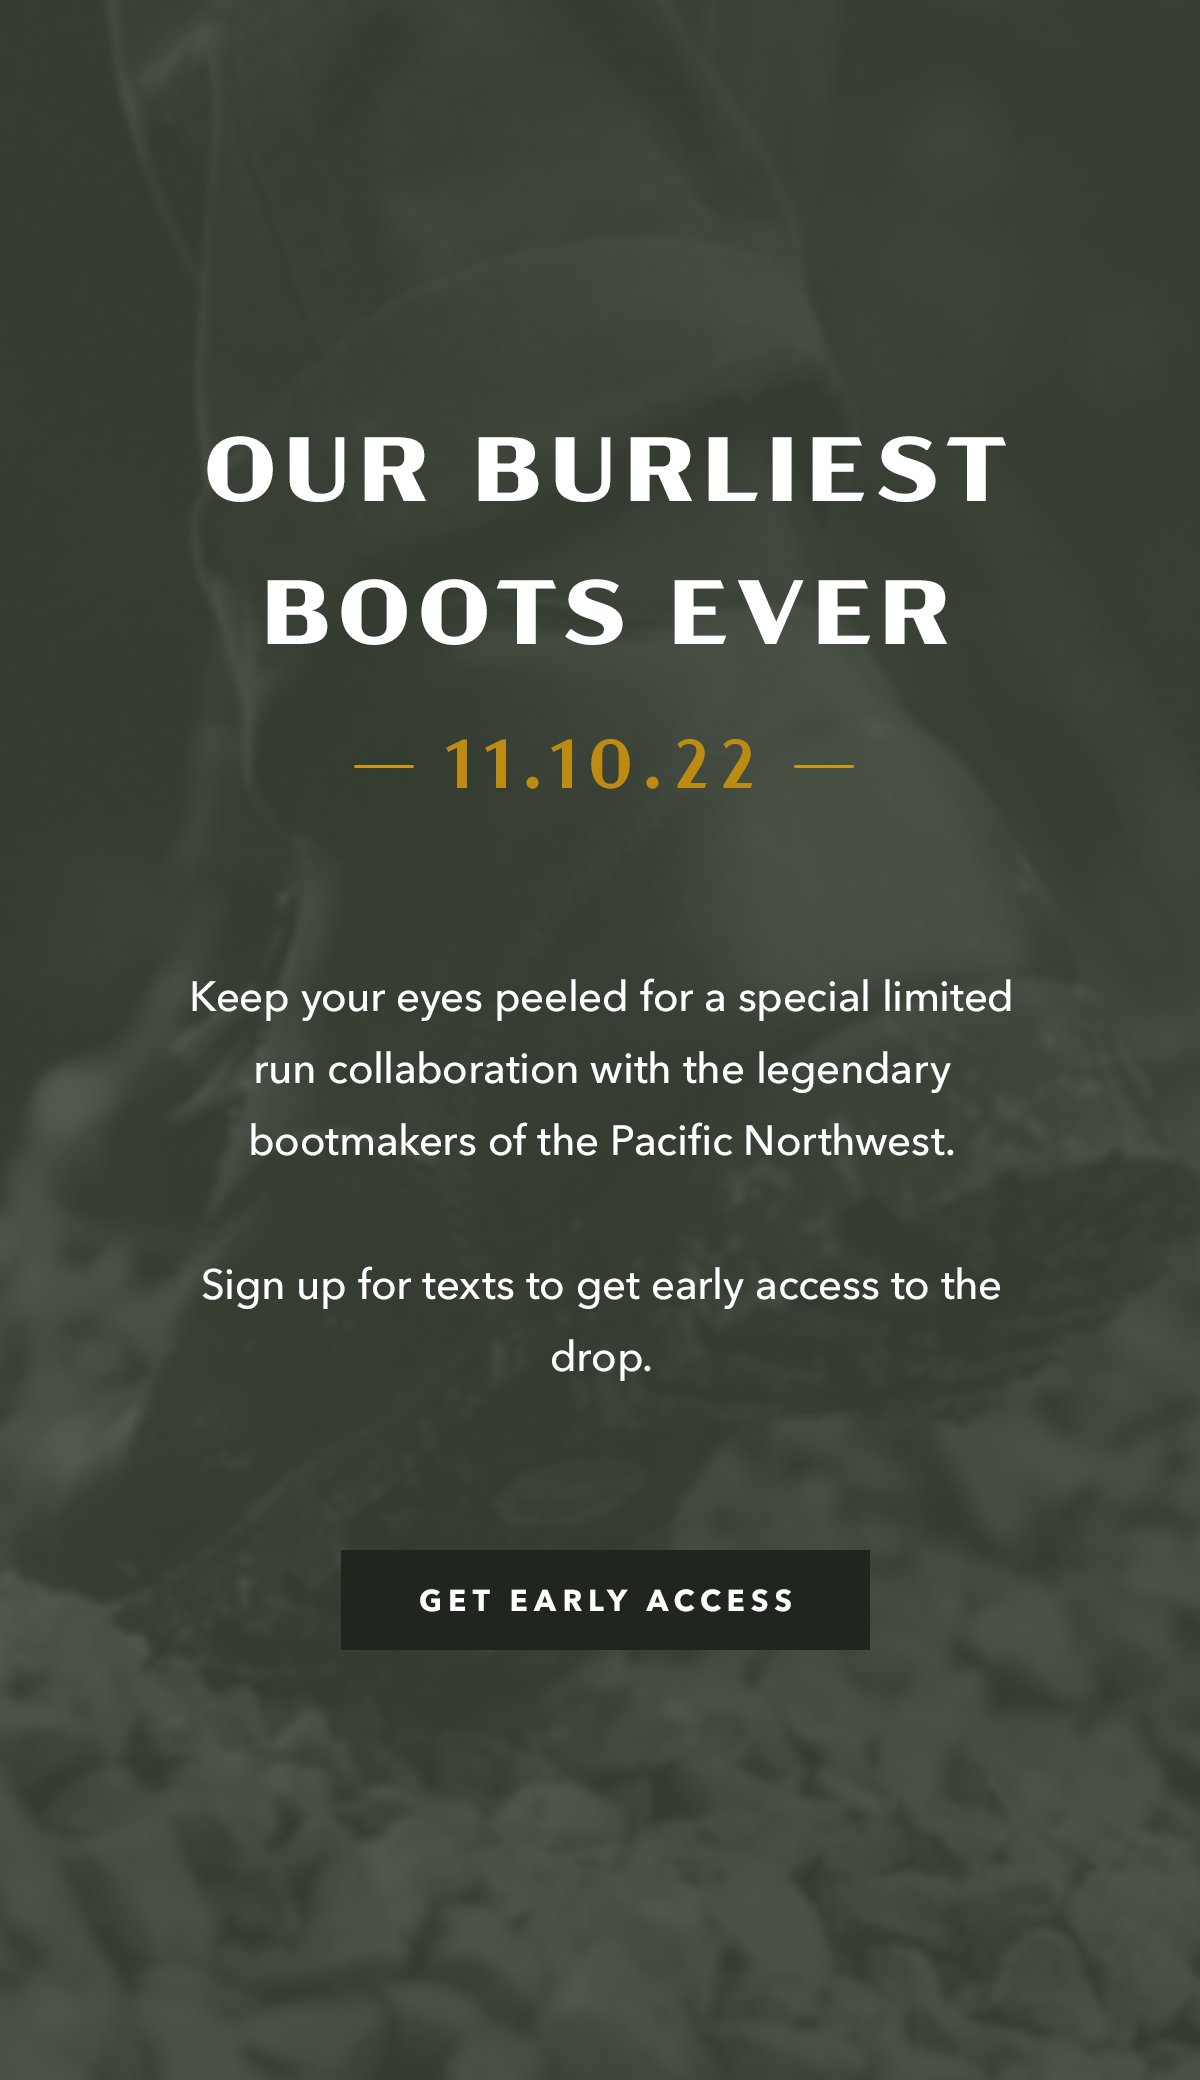 Our Burliest Boots Ever  Keep your eyes peeled for a special limited run collaboration with some of our buddies and legendary bootmakers in the Pacific Northwest. Sign up for texts to get early access to the drop.